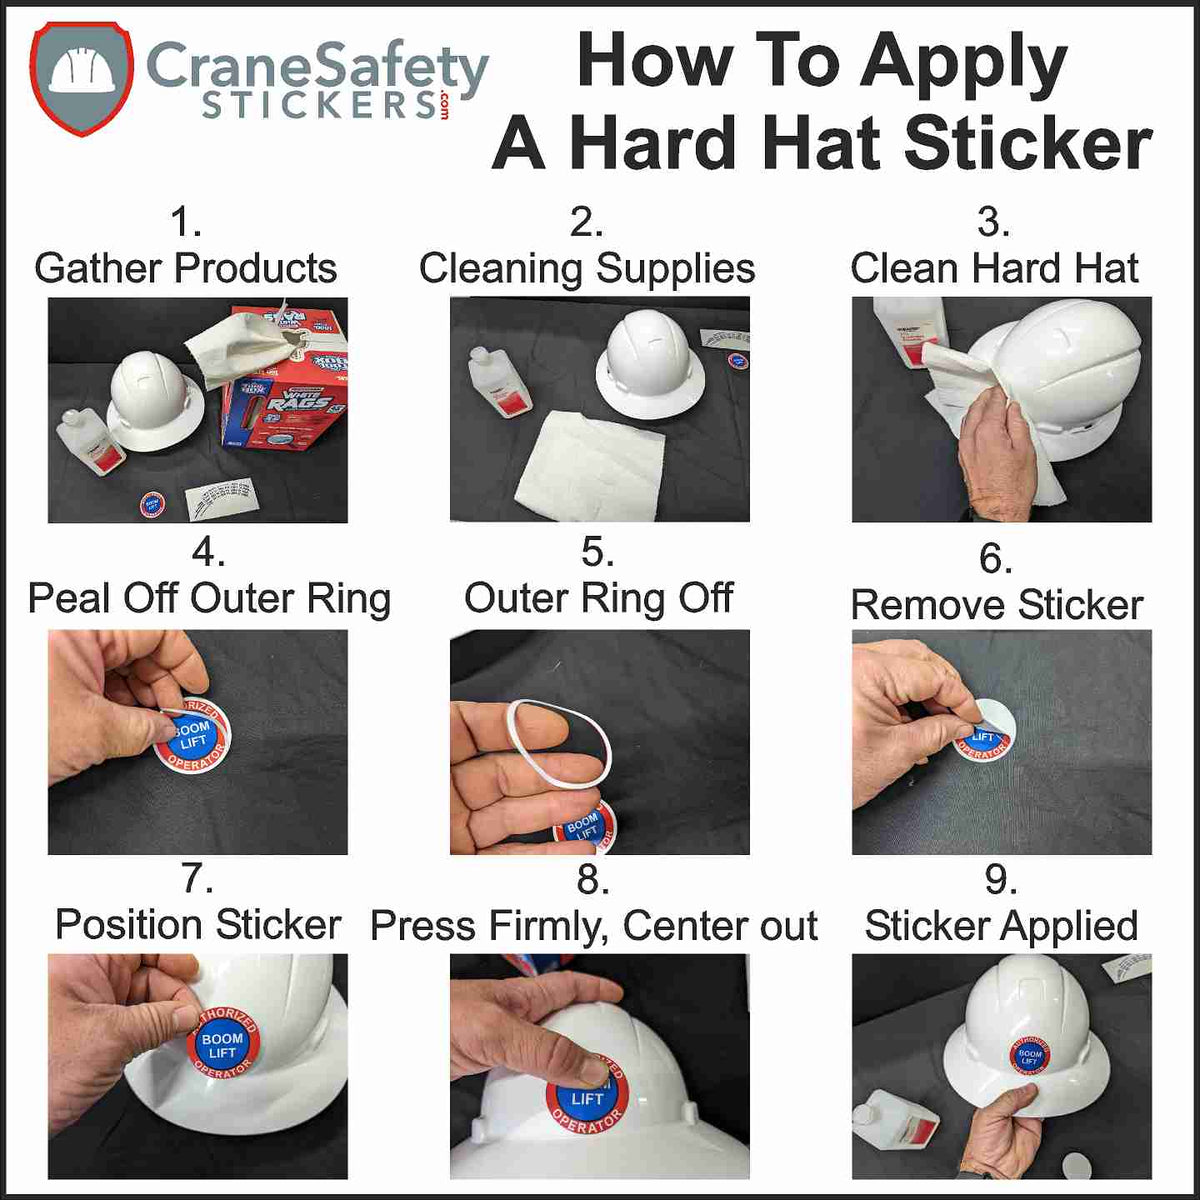 How to apply our confined space rescue team hard hat sticker to a hard hat.